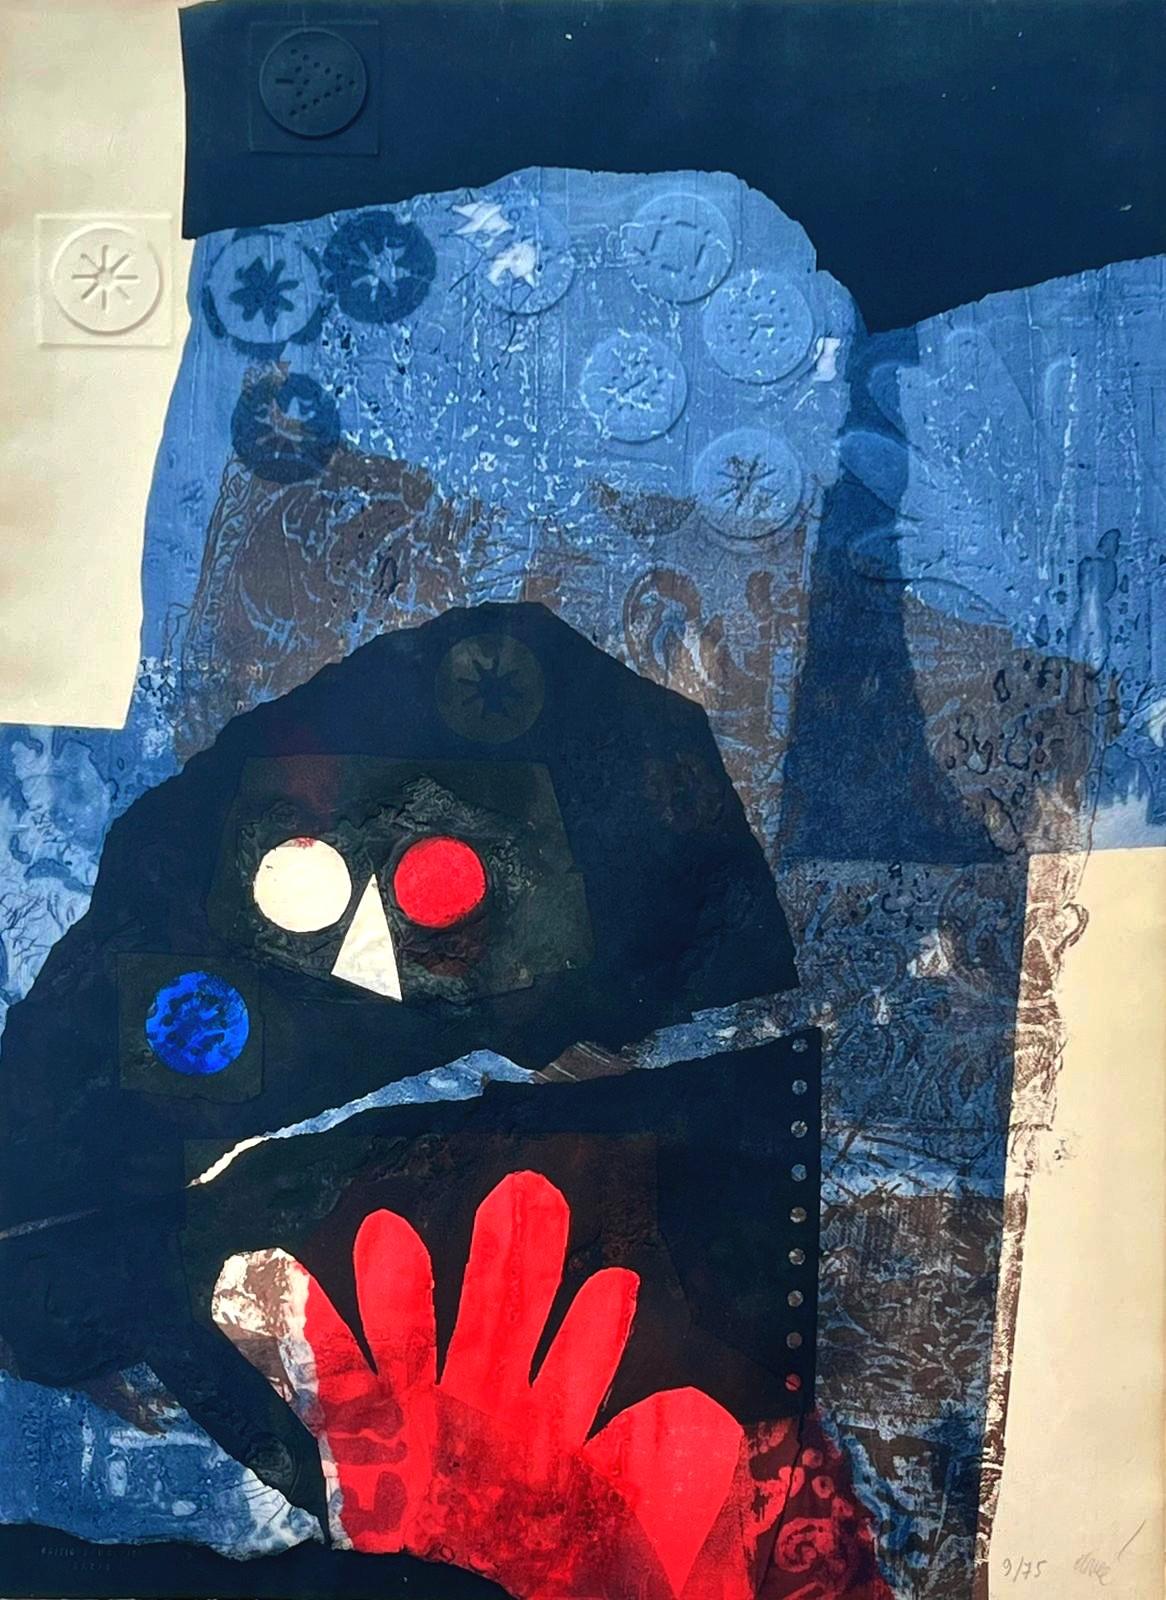 Antoni Clavé Abstract Print - The man with the red eye 